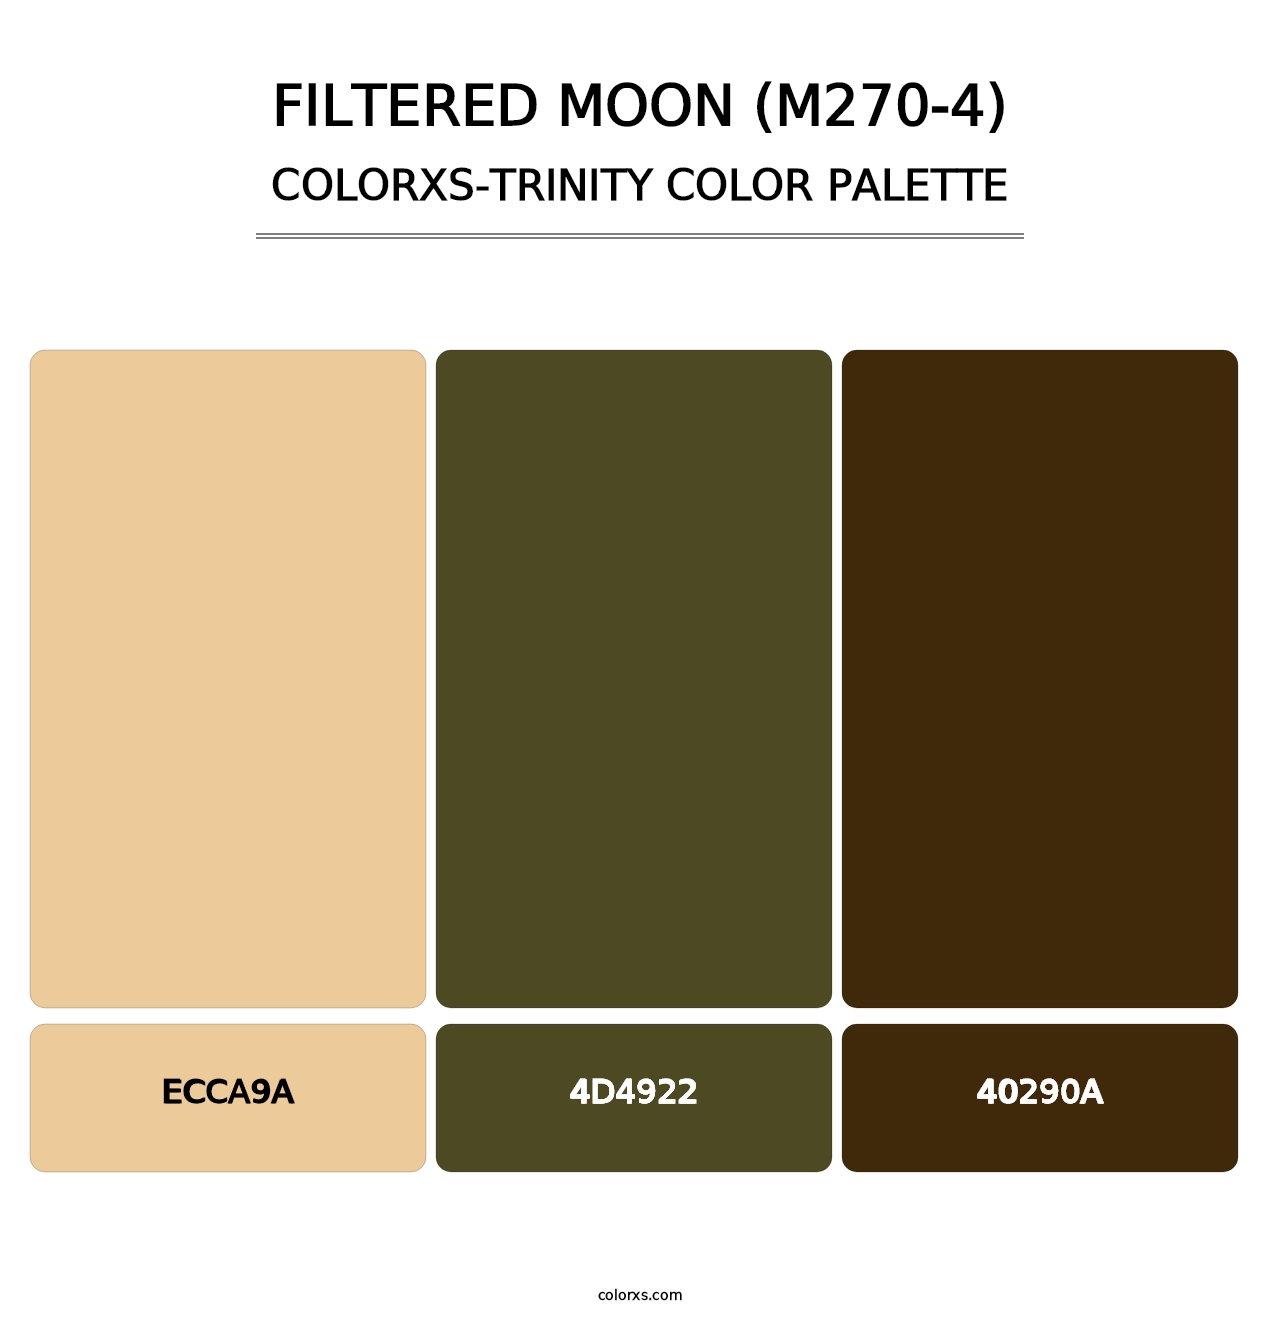 Filtered Moon (M270-4) - Colorxs Trinity Palette